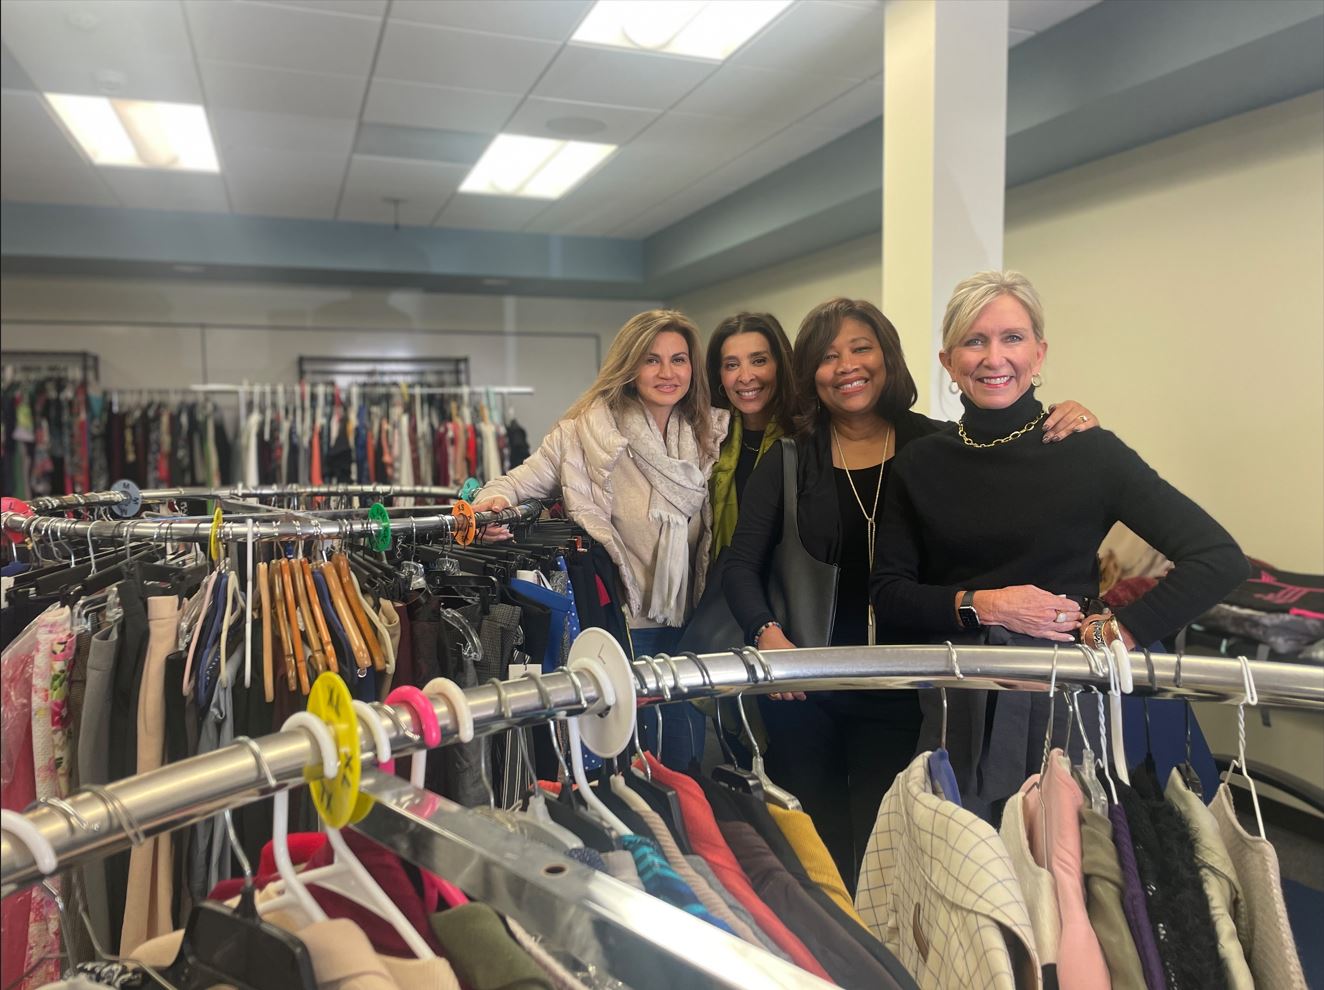 The Clothes Closet has been a success but needs community support